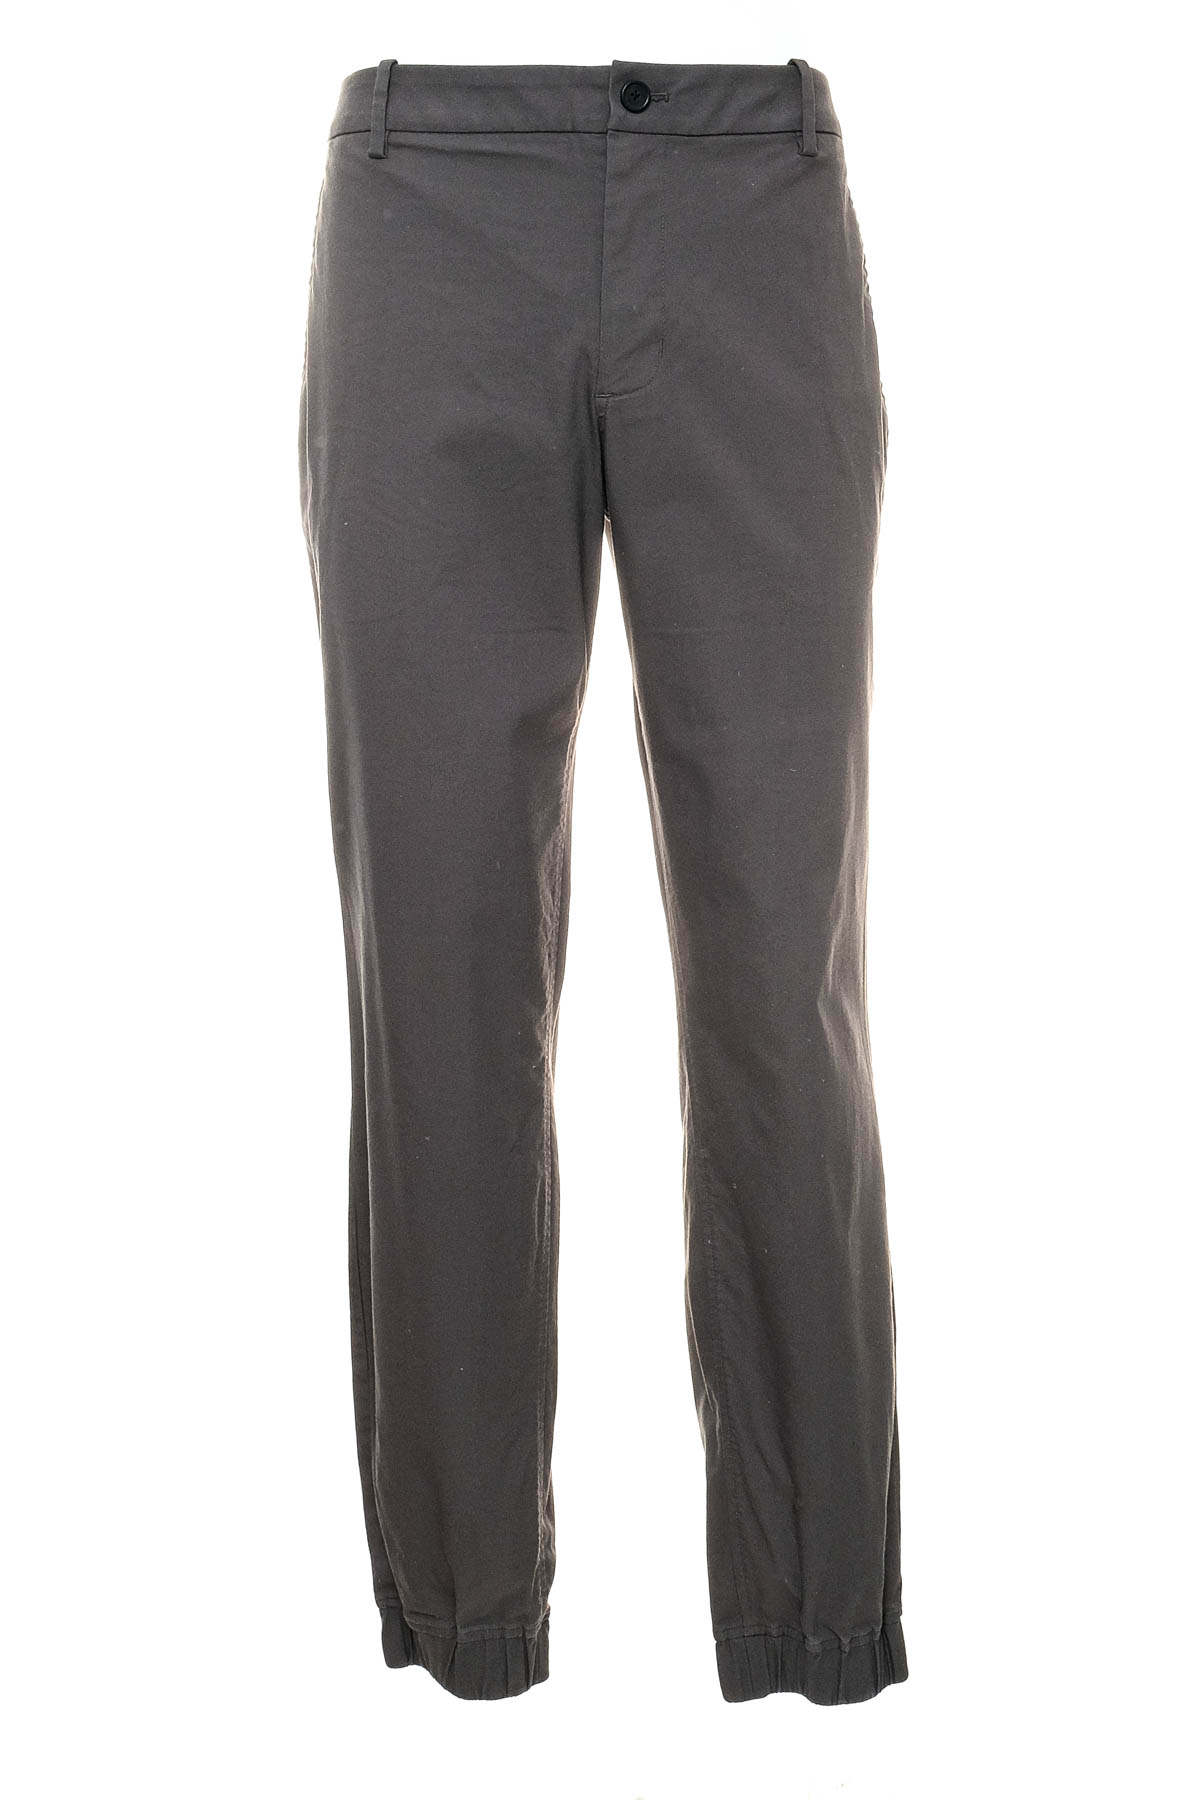 Men's trousers - KIT and ACE - 0